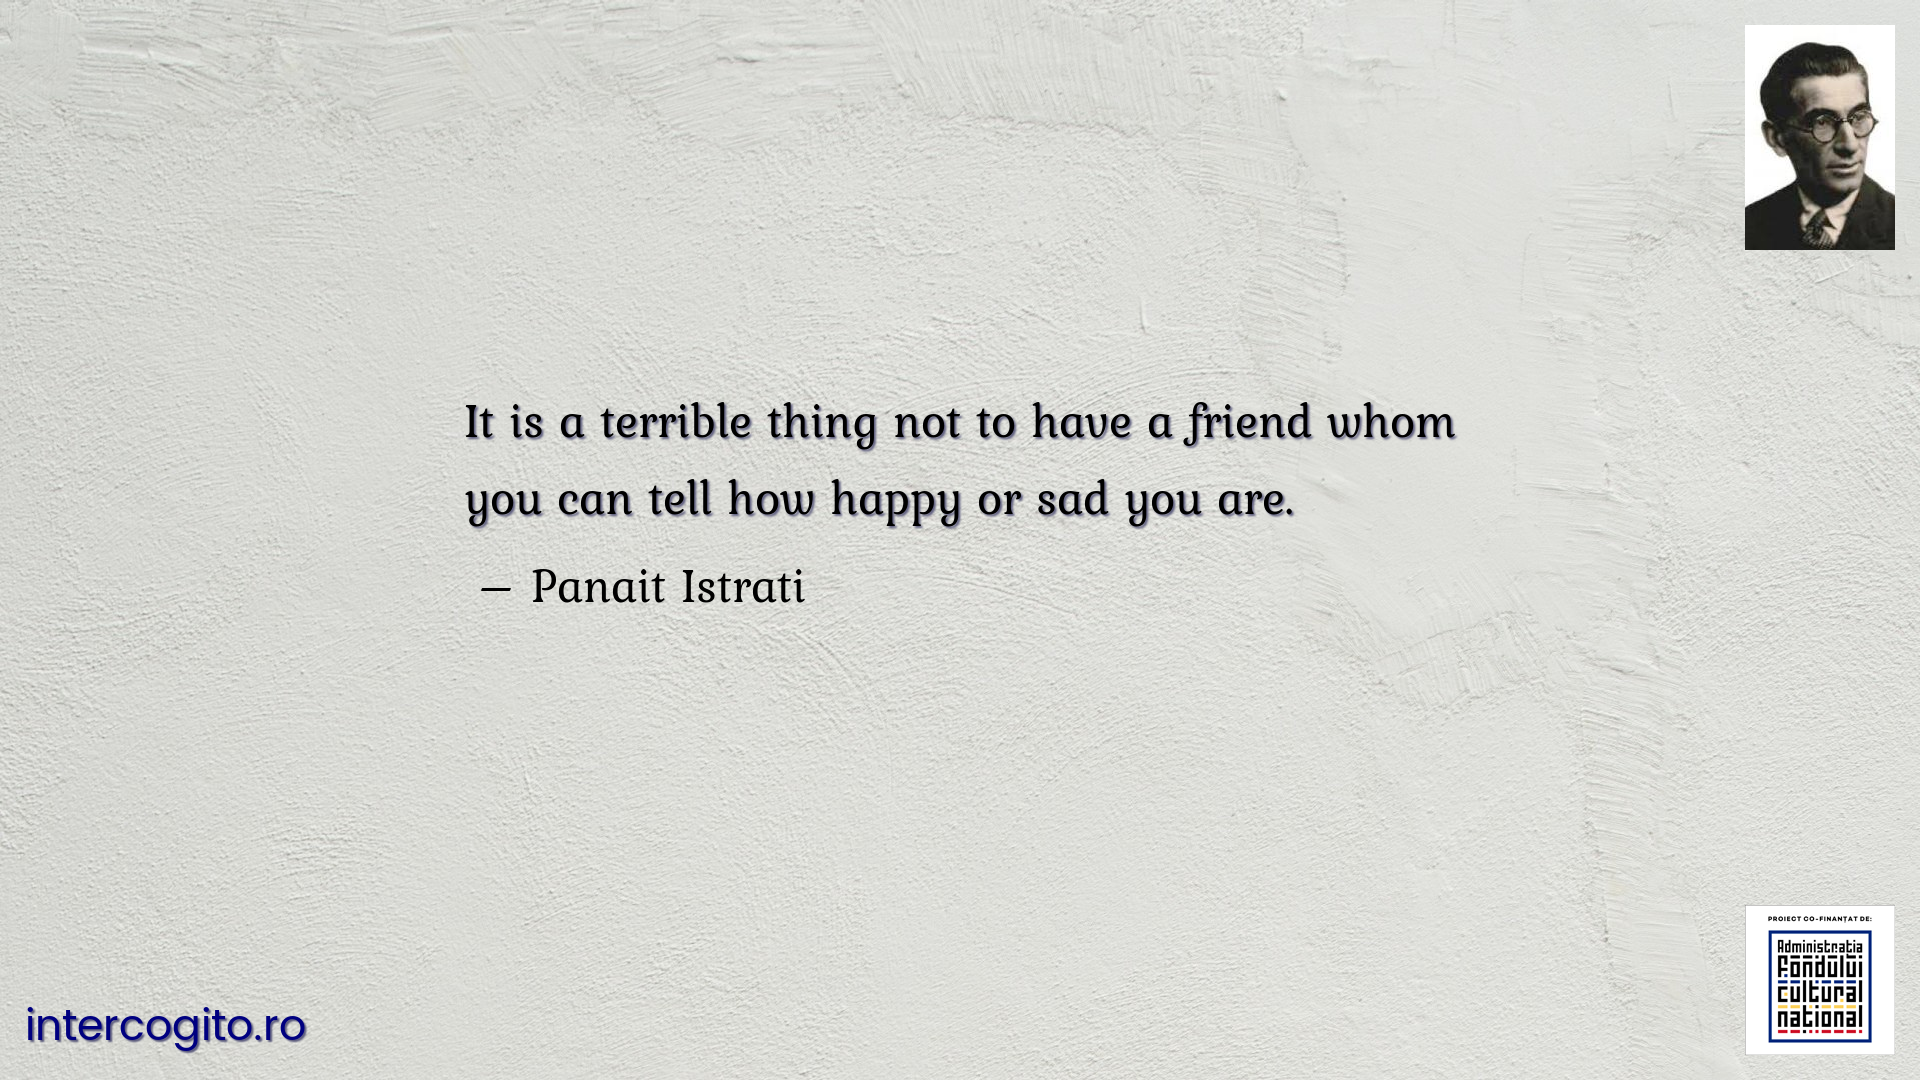 It is a terrible thing not to have a friend whom you can tell how happy or sad you are.